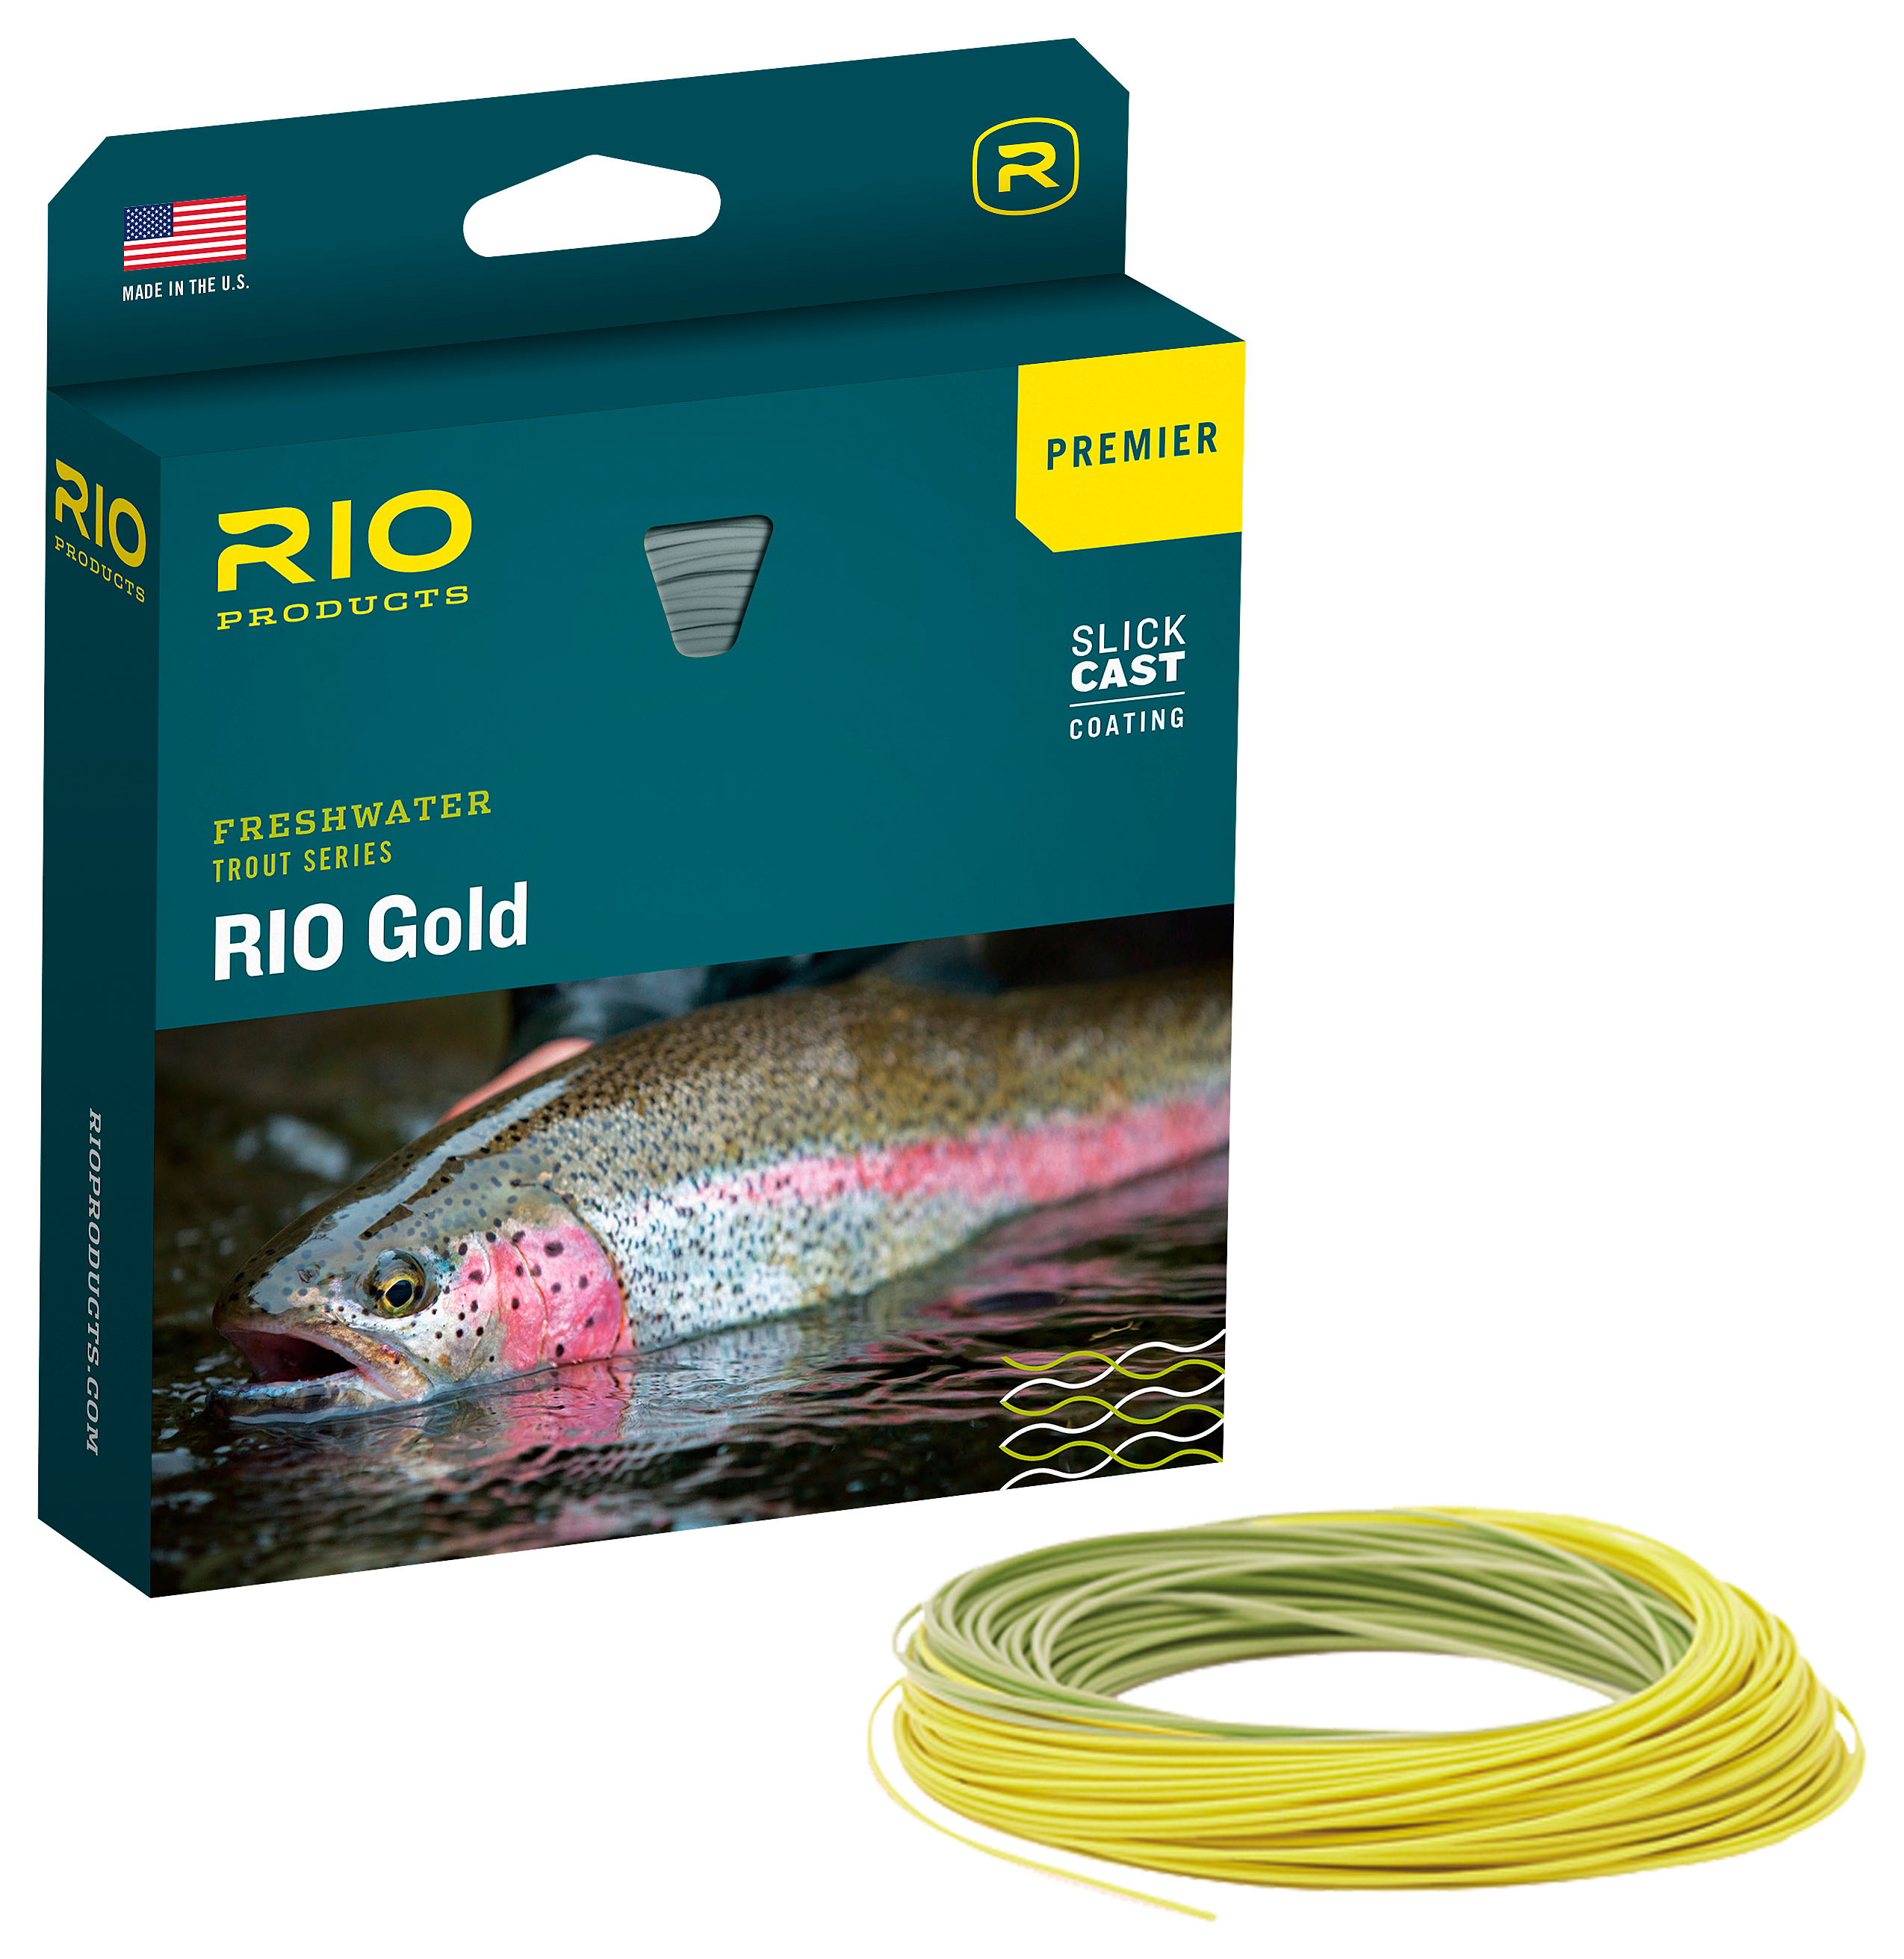 RIO Premier RIO Gold Fly Line - Moss/Gold - 90' - 8 Wt.